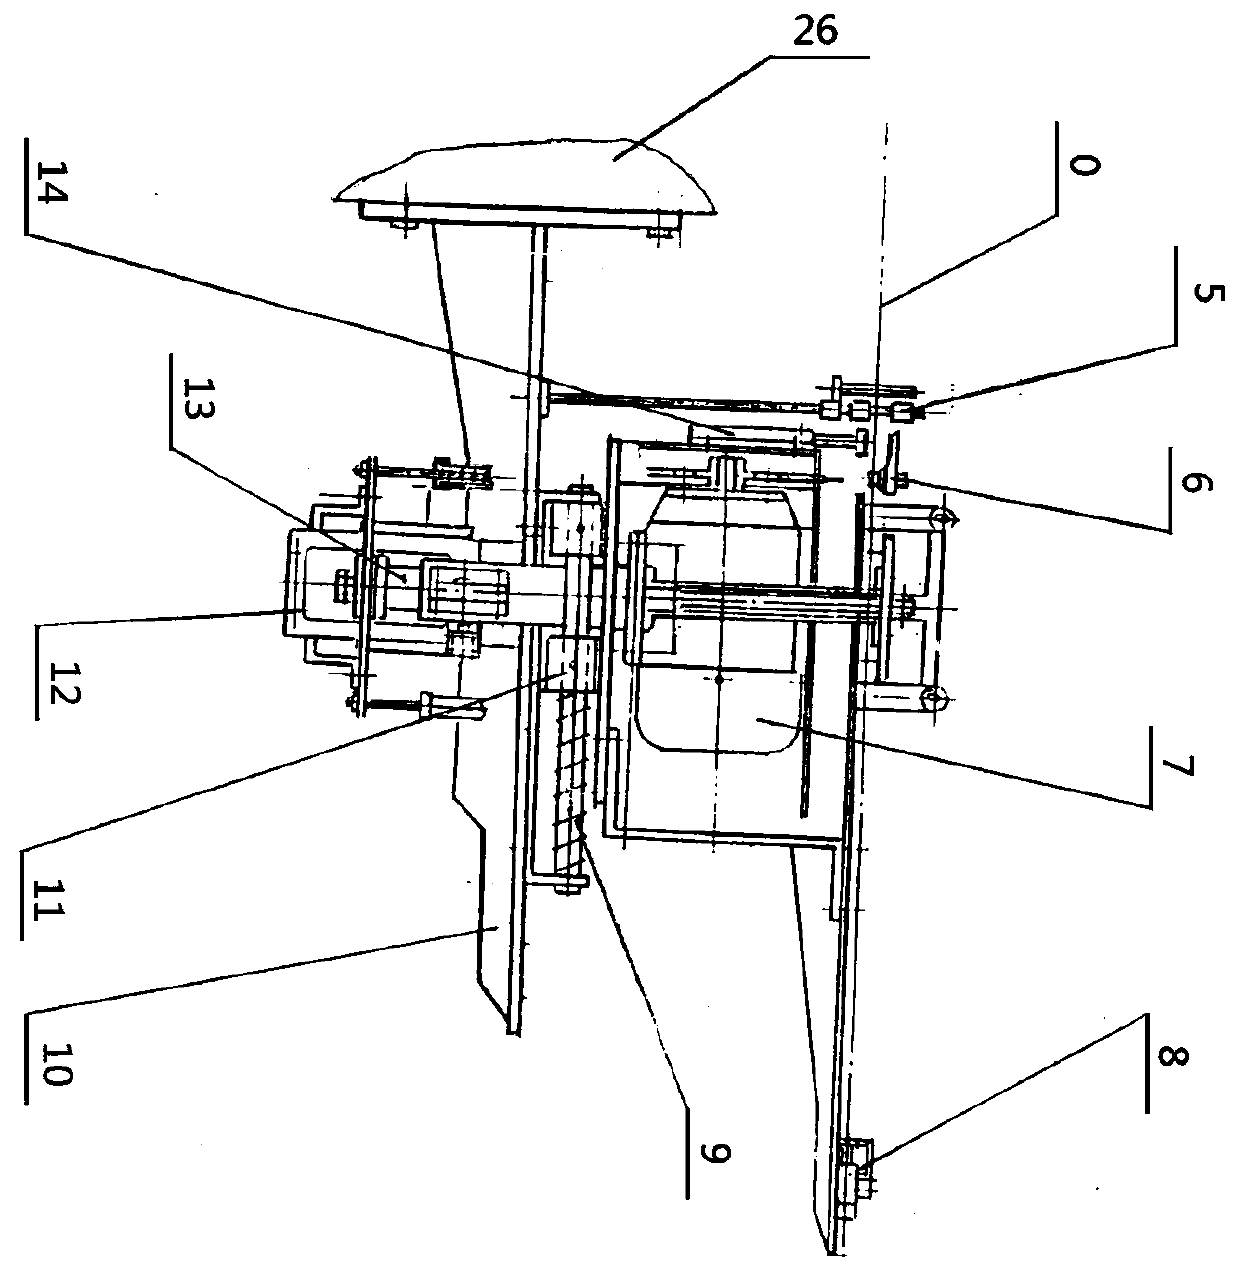 Multi-functional cut-off machine having manual and full-automatic working modes